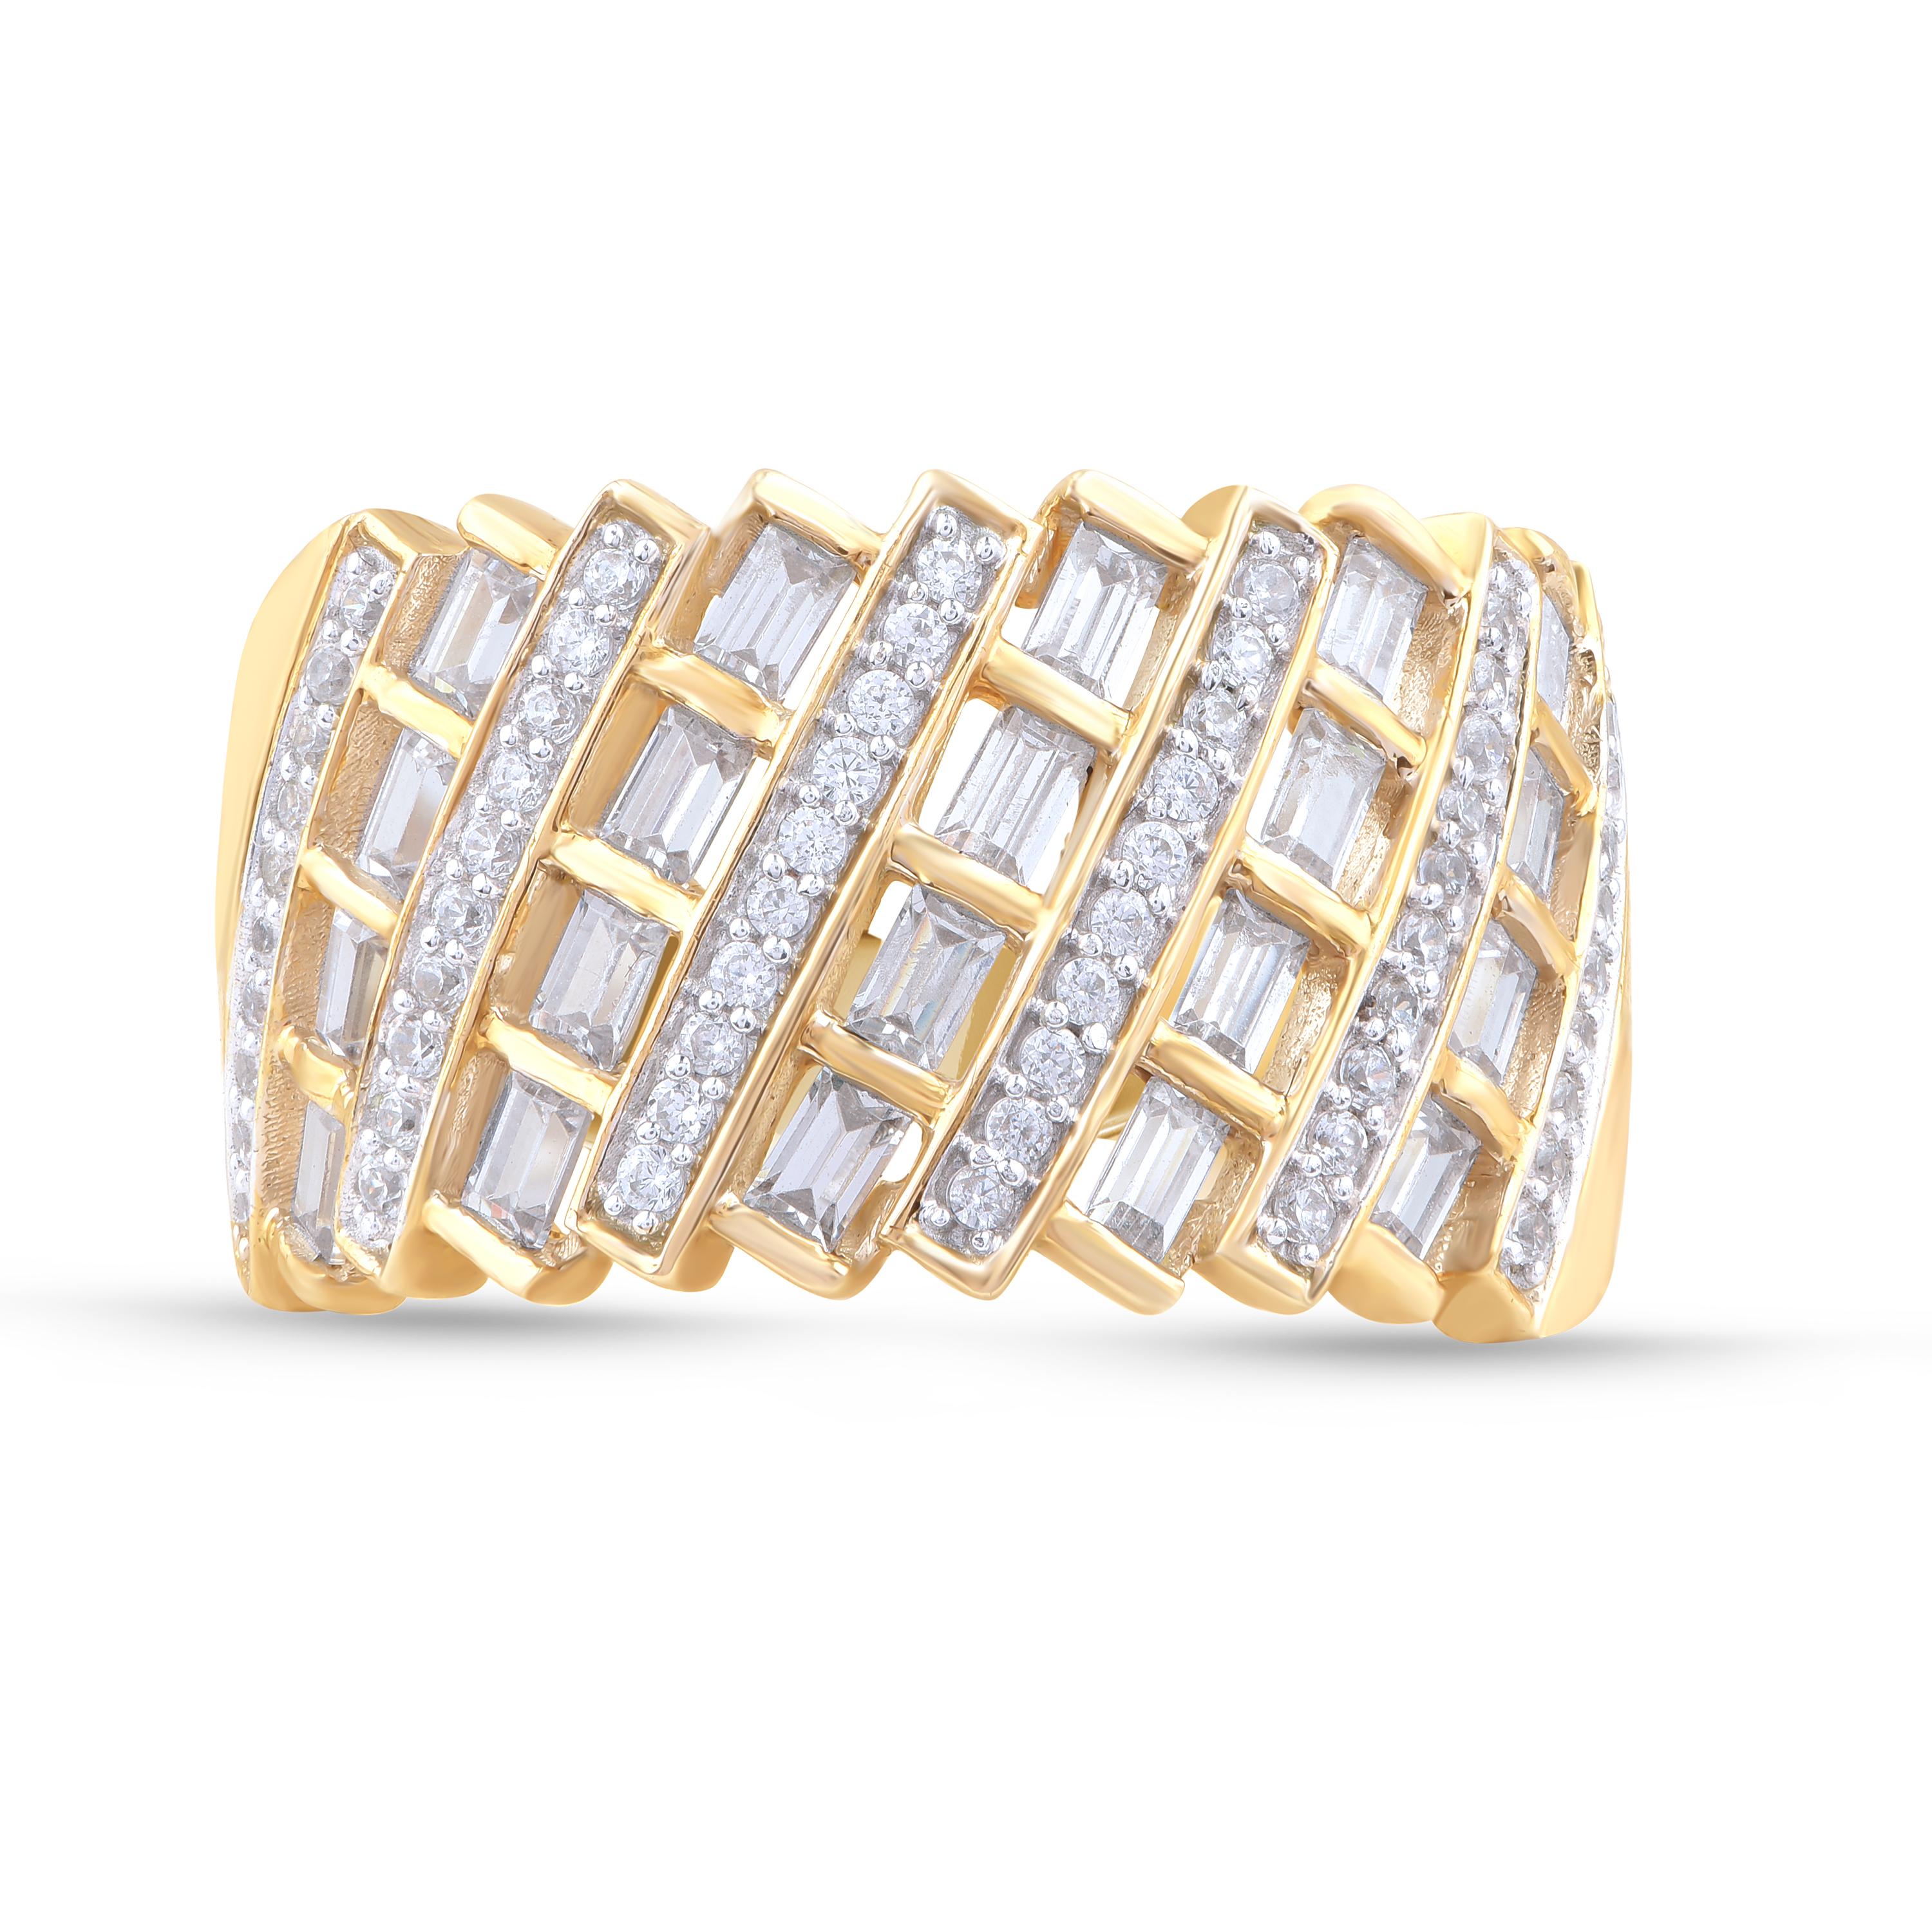 Make your most special and precious day shine with this wedding band ring. Beautifully crafted by our inhouse experts in 14 karat yellow gold and embellished with 100 brilliant cut round diamond and baguette diamonds set in pave and channel setting.